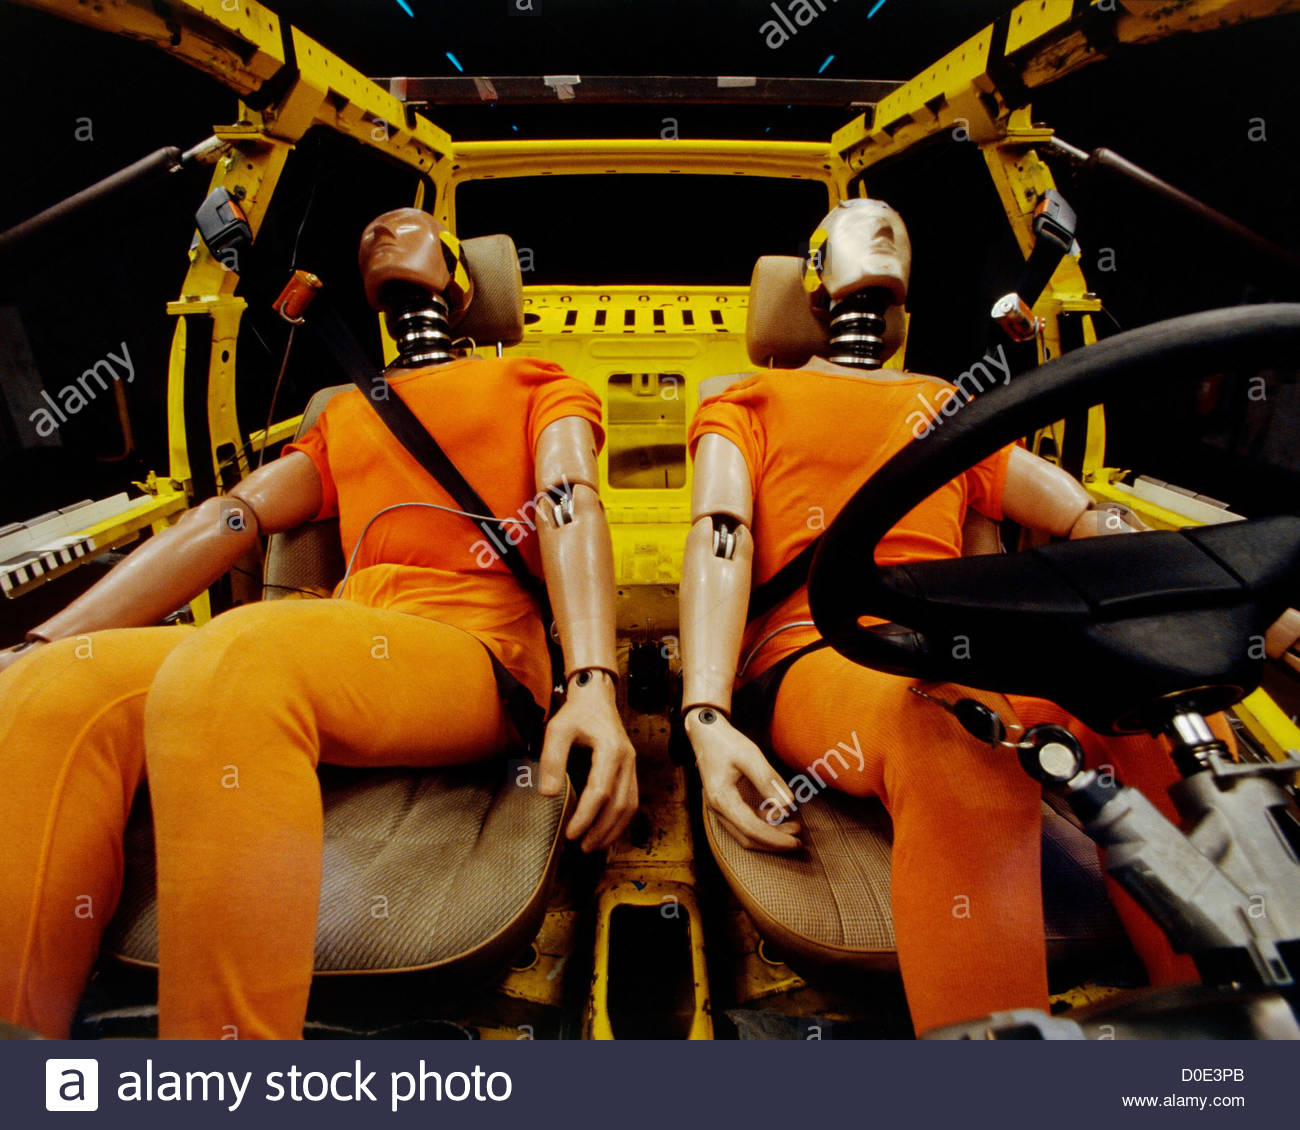 Crash Test Dummies High Resolution Stock Photography and Images Alamy